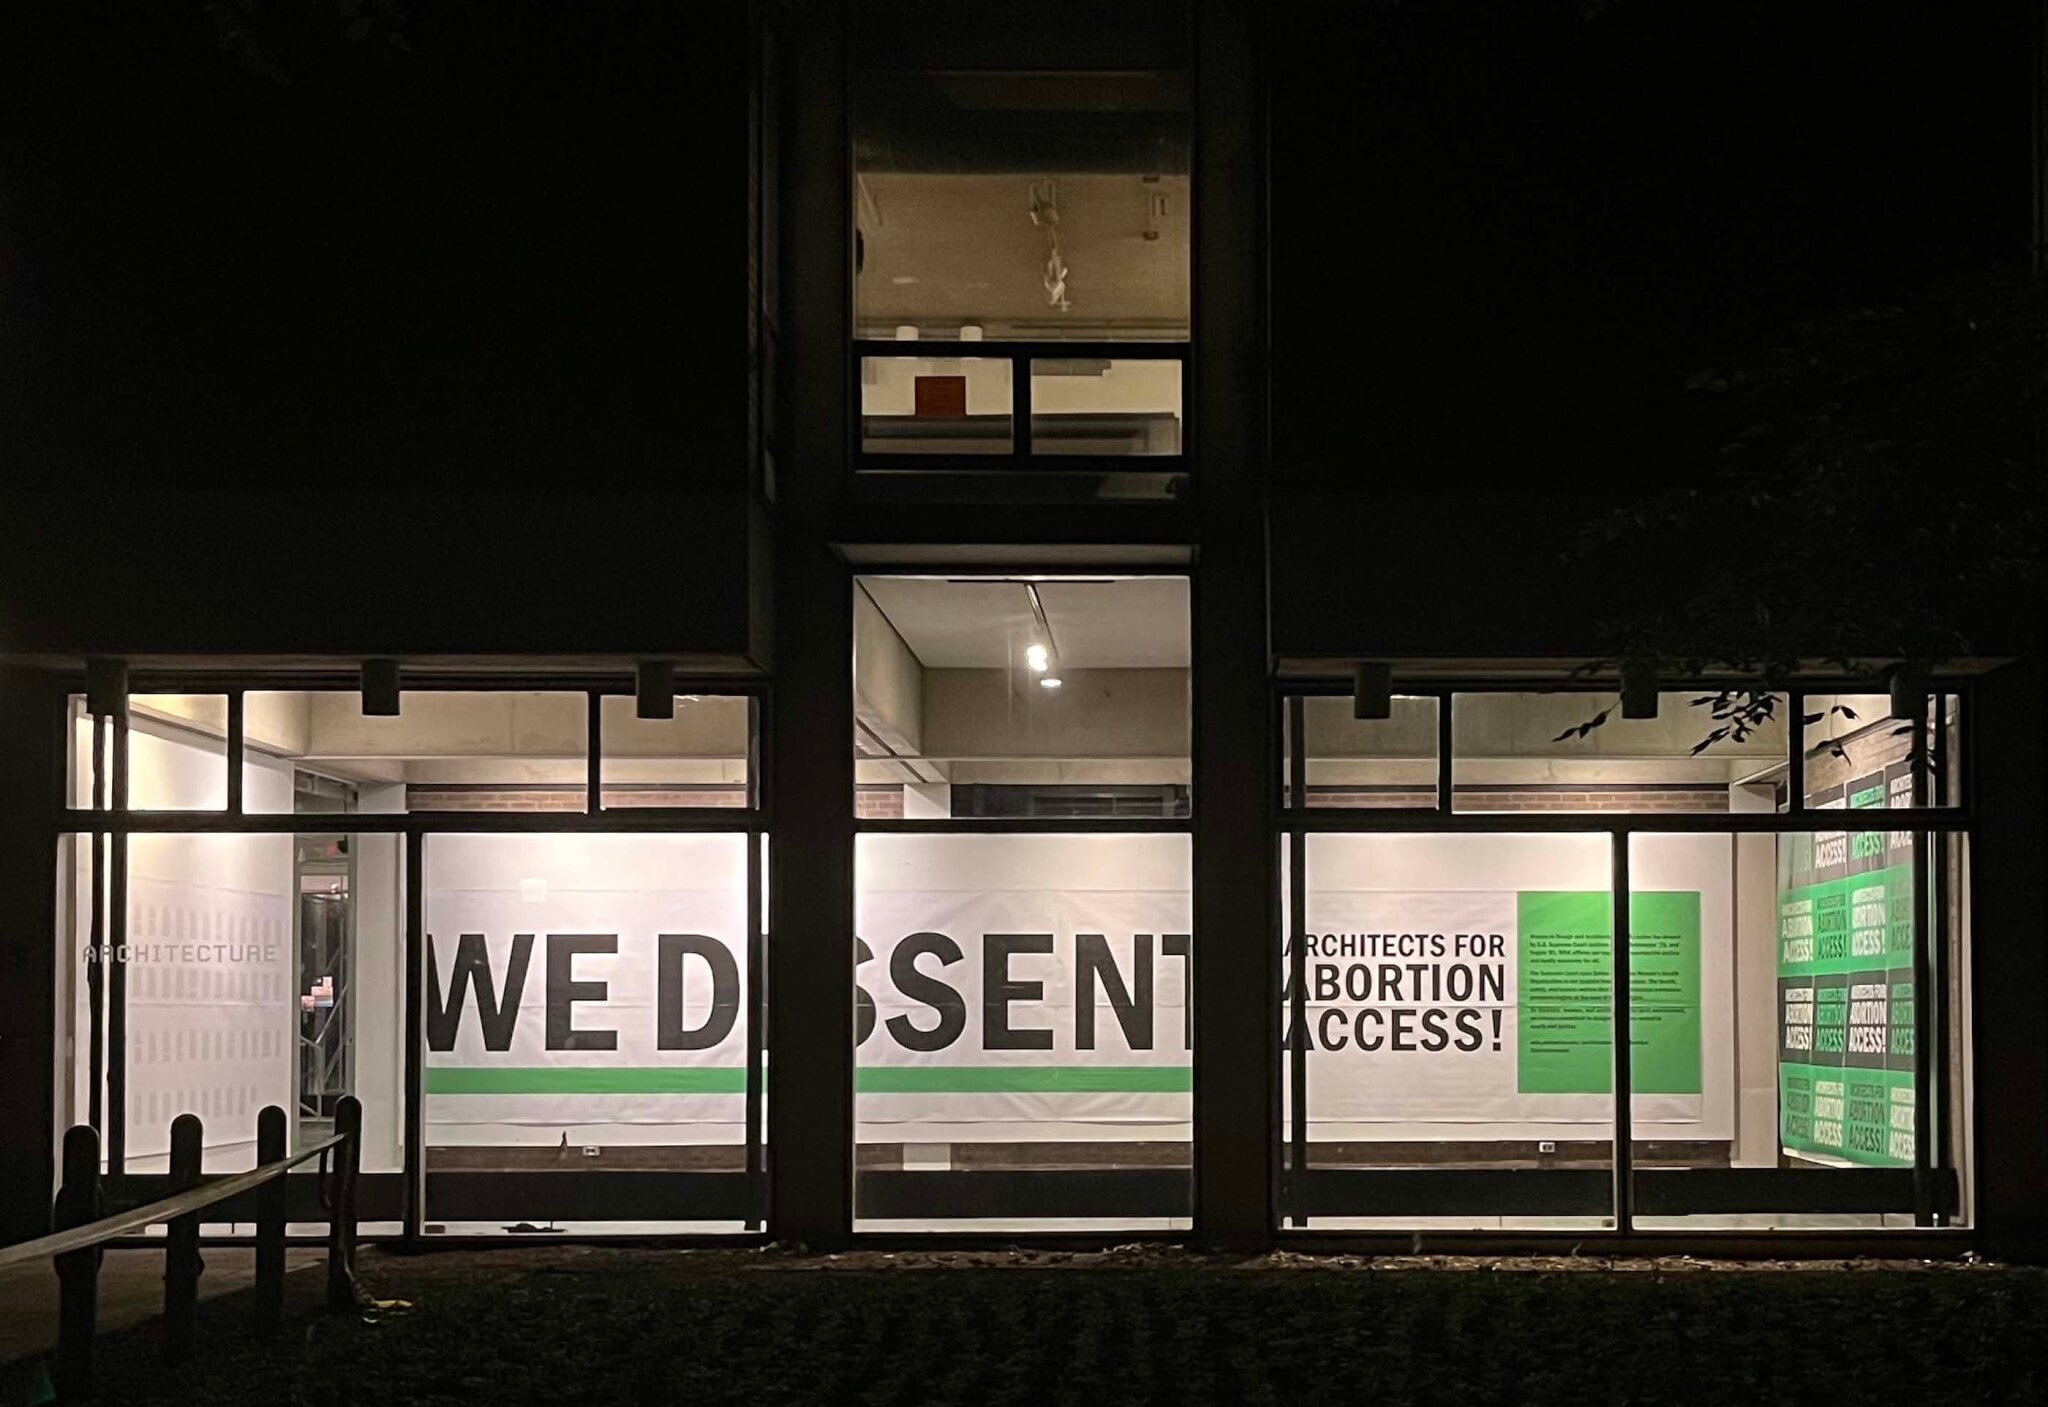 view of exhibition signage at night